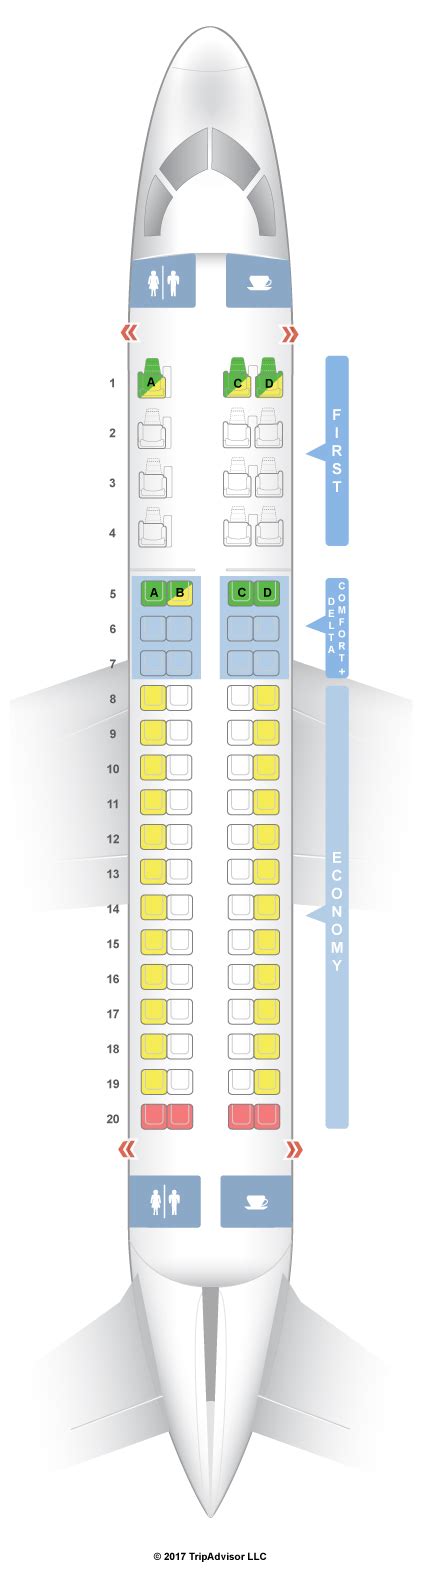 Overview. United flies the Embraer ERJ-135 with 37 seats in a one-class configuration of Economy. This aircraft type is used for regional routes. The unique 1-2 layout of the cabin is preferred by many flyers, particularly for the solo seats on the left hand side.